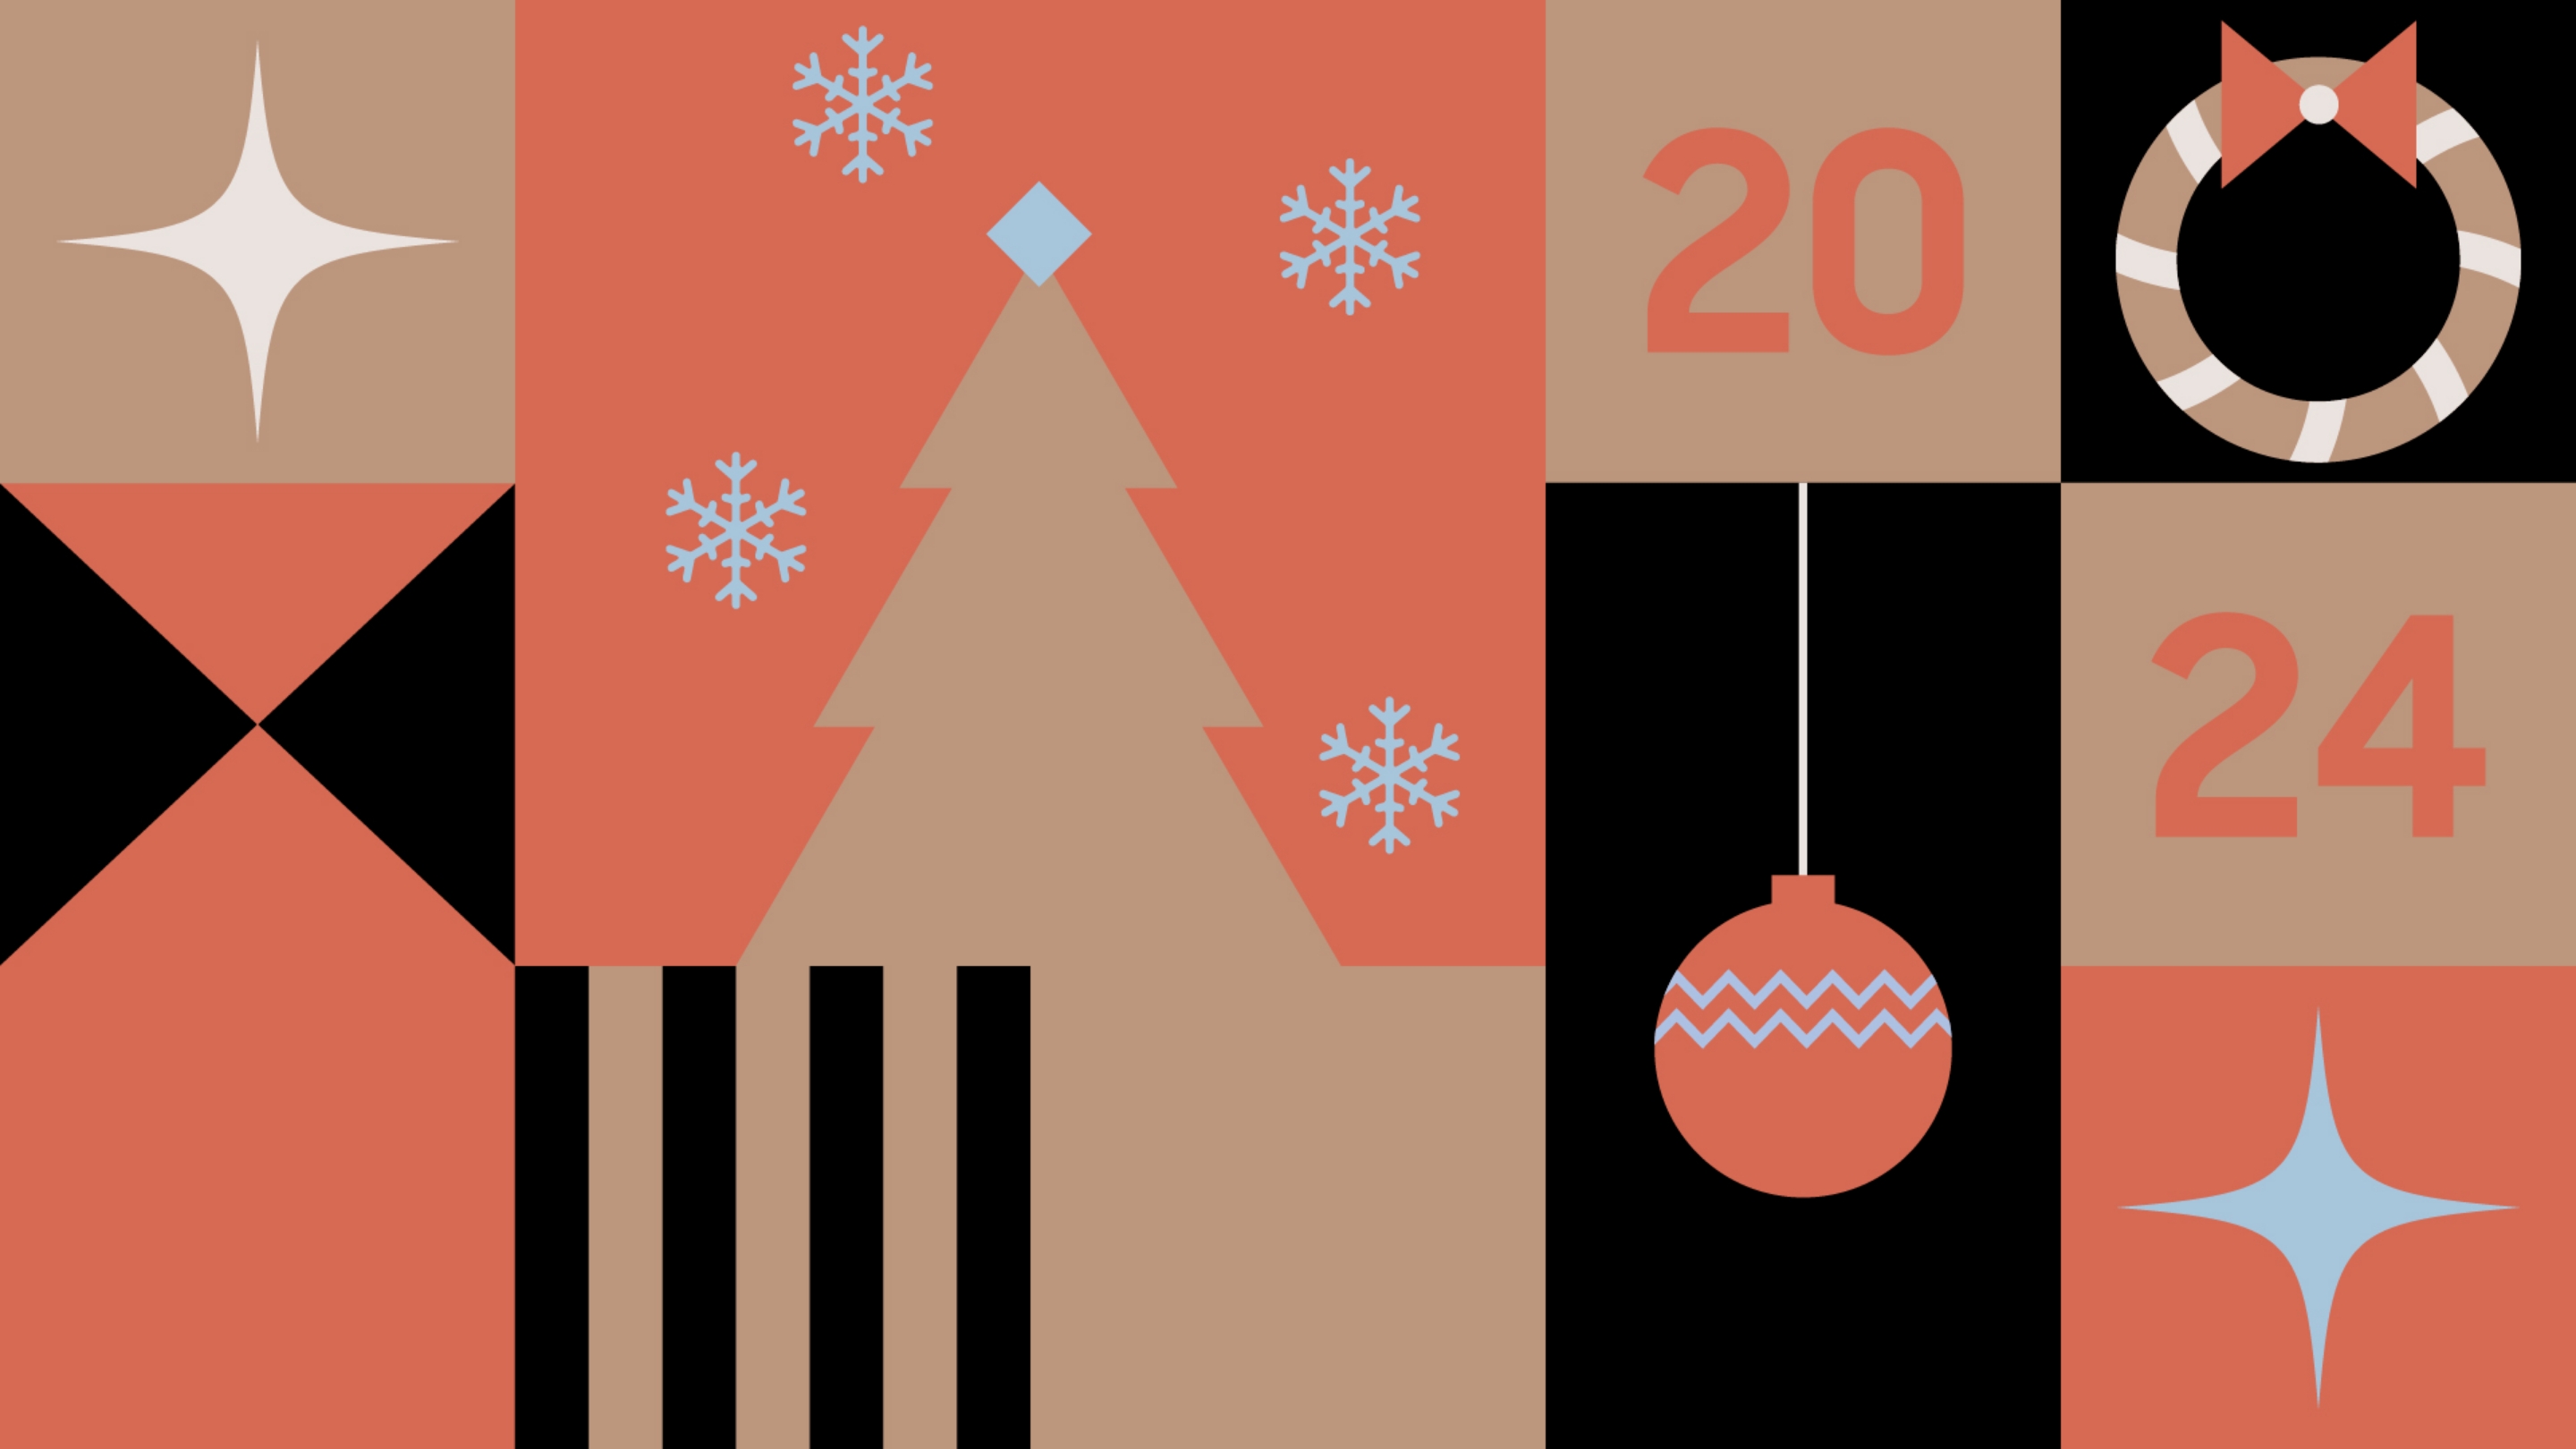 There are 2024 numbers and decorative balls, a Christmas tree and snowflakes in each of the divided square compartments.